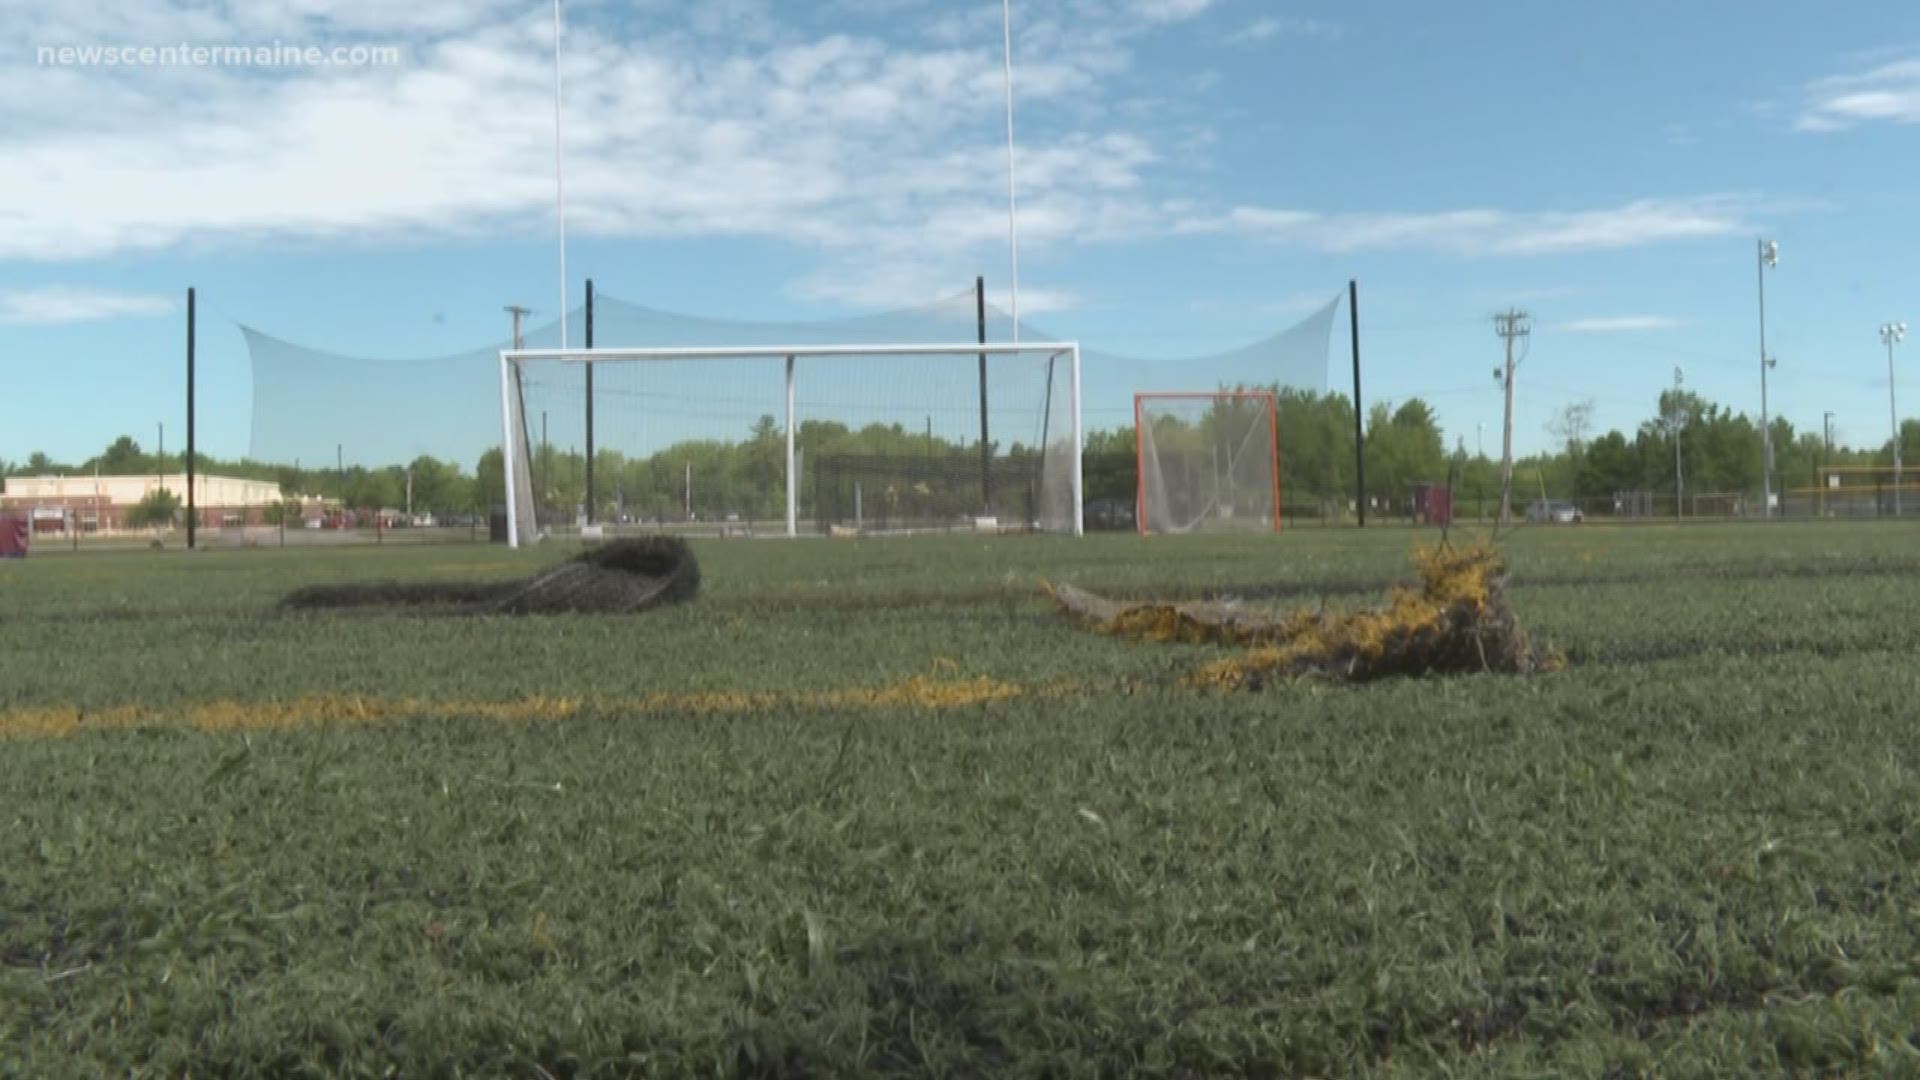 Police say it looks like a vehicle ruined a turf field in Scarborough, used for football, soccer, lacrosse, and field hockey.